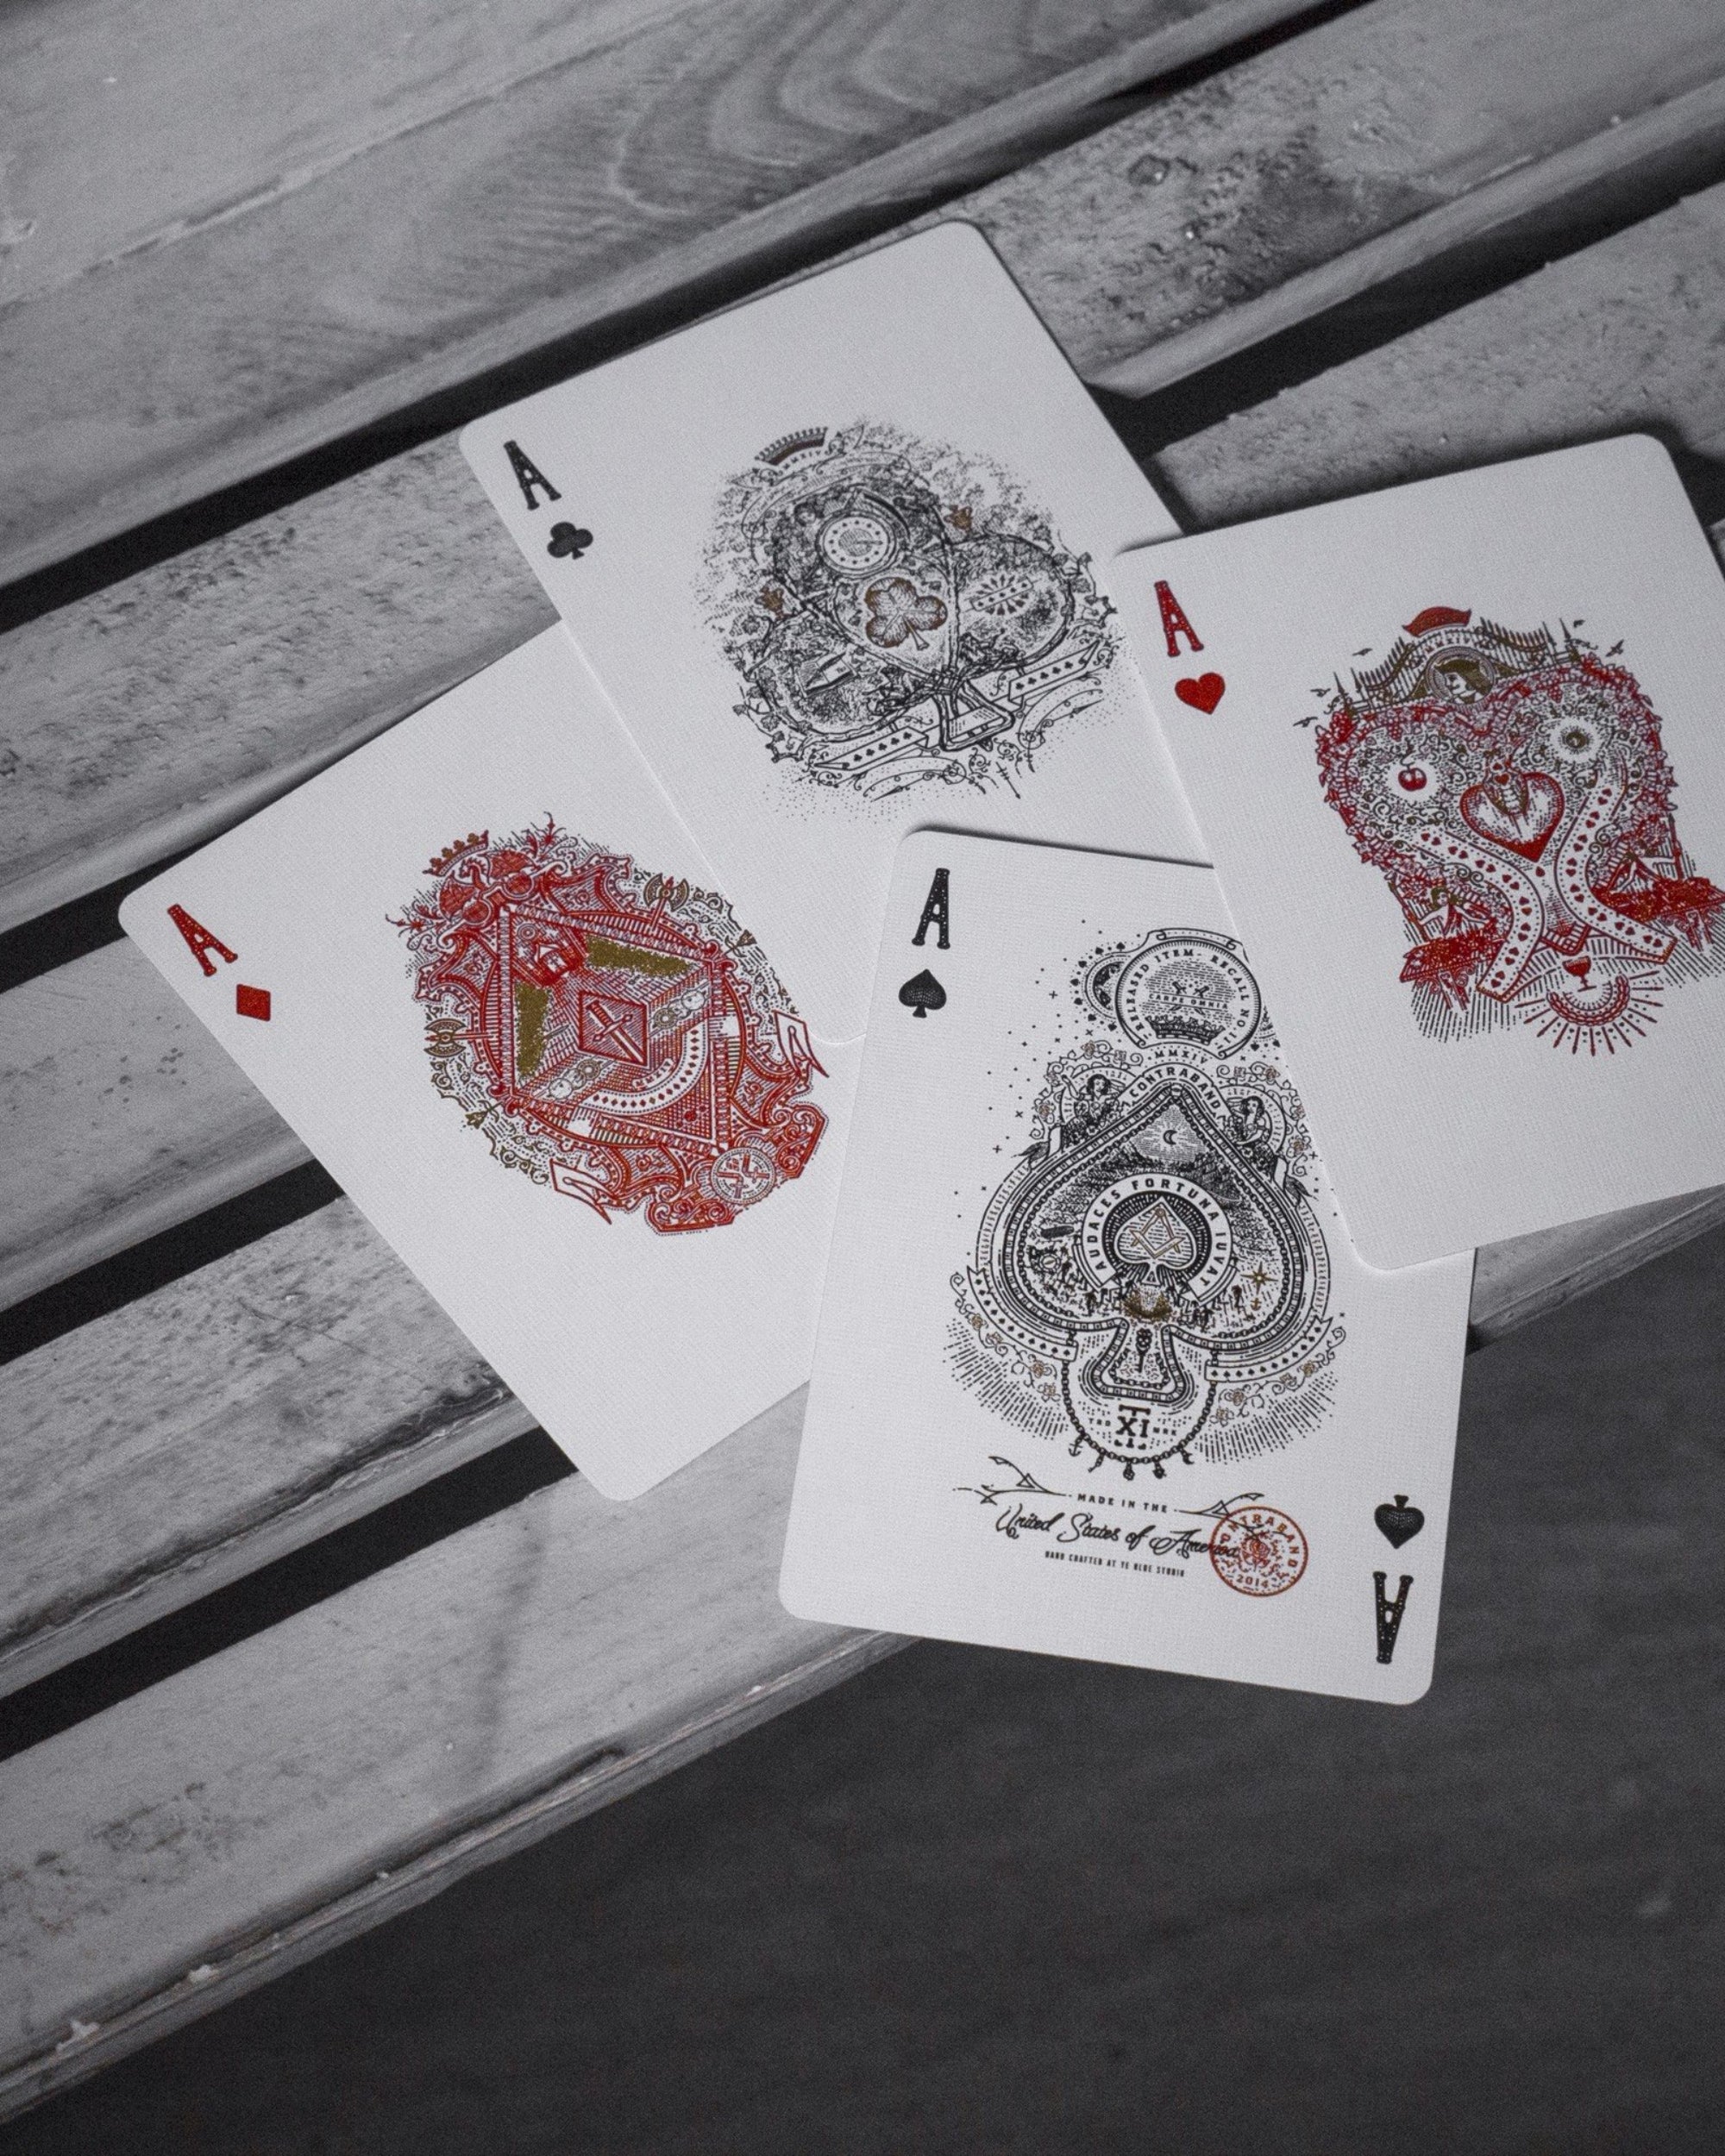 theory11 : contraband playing cards